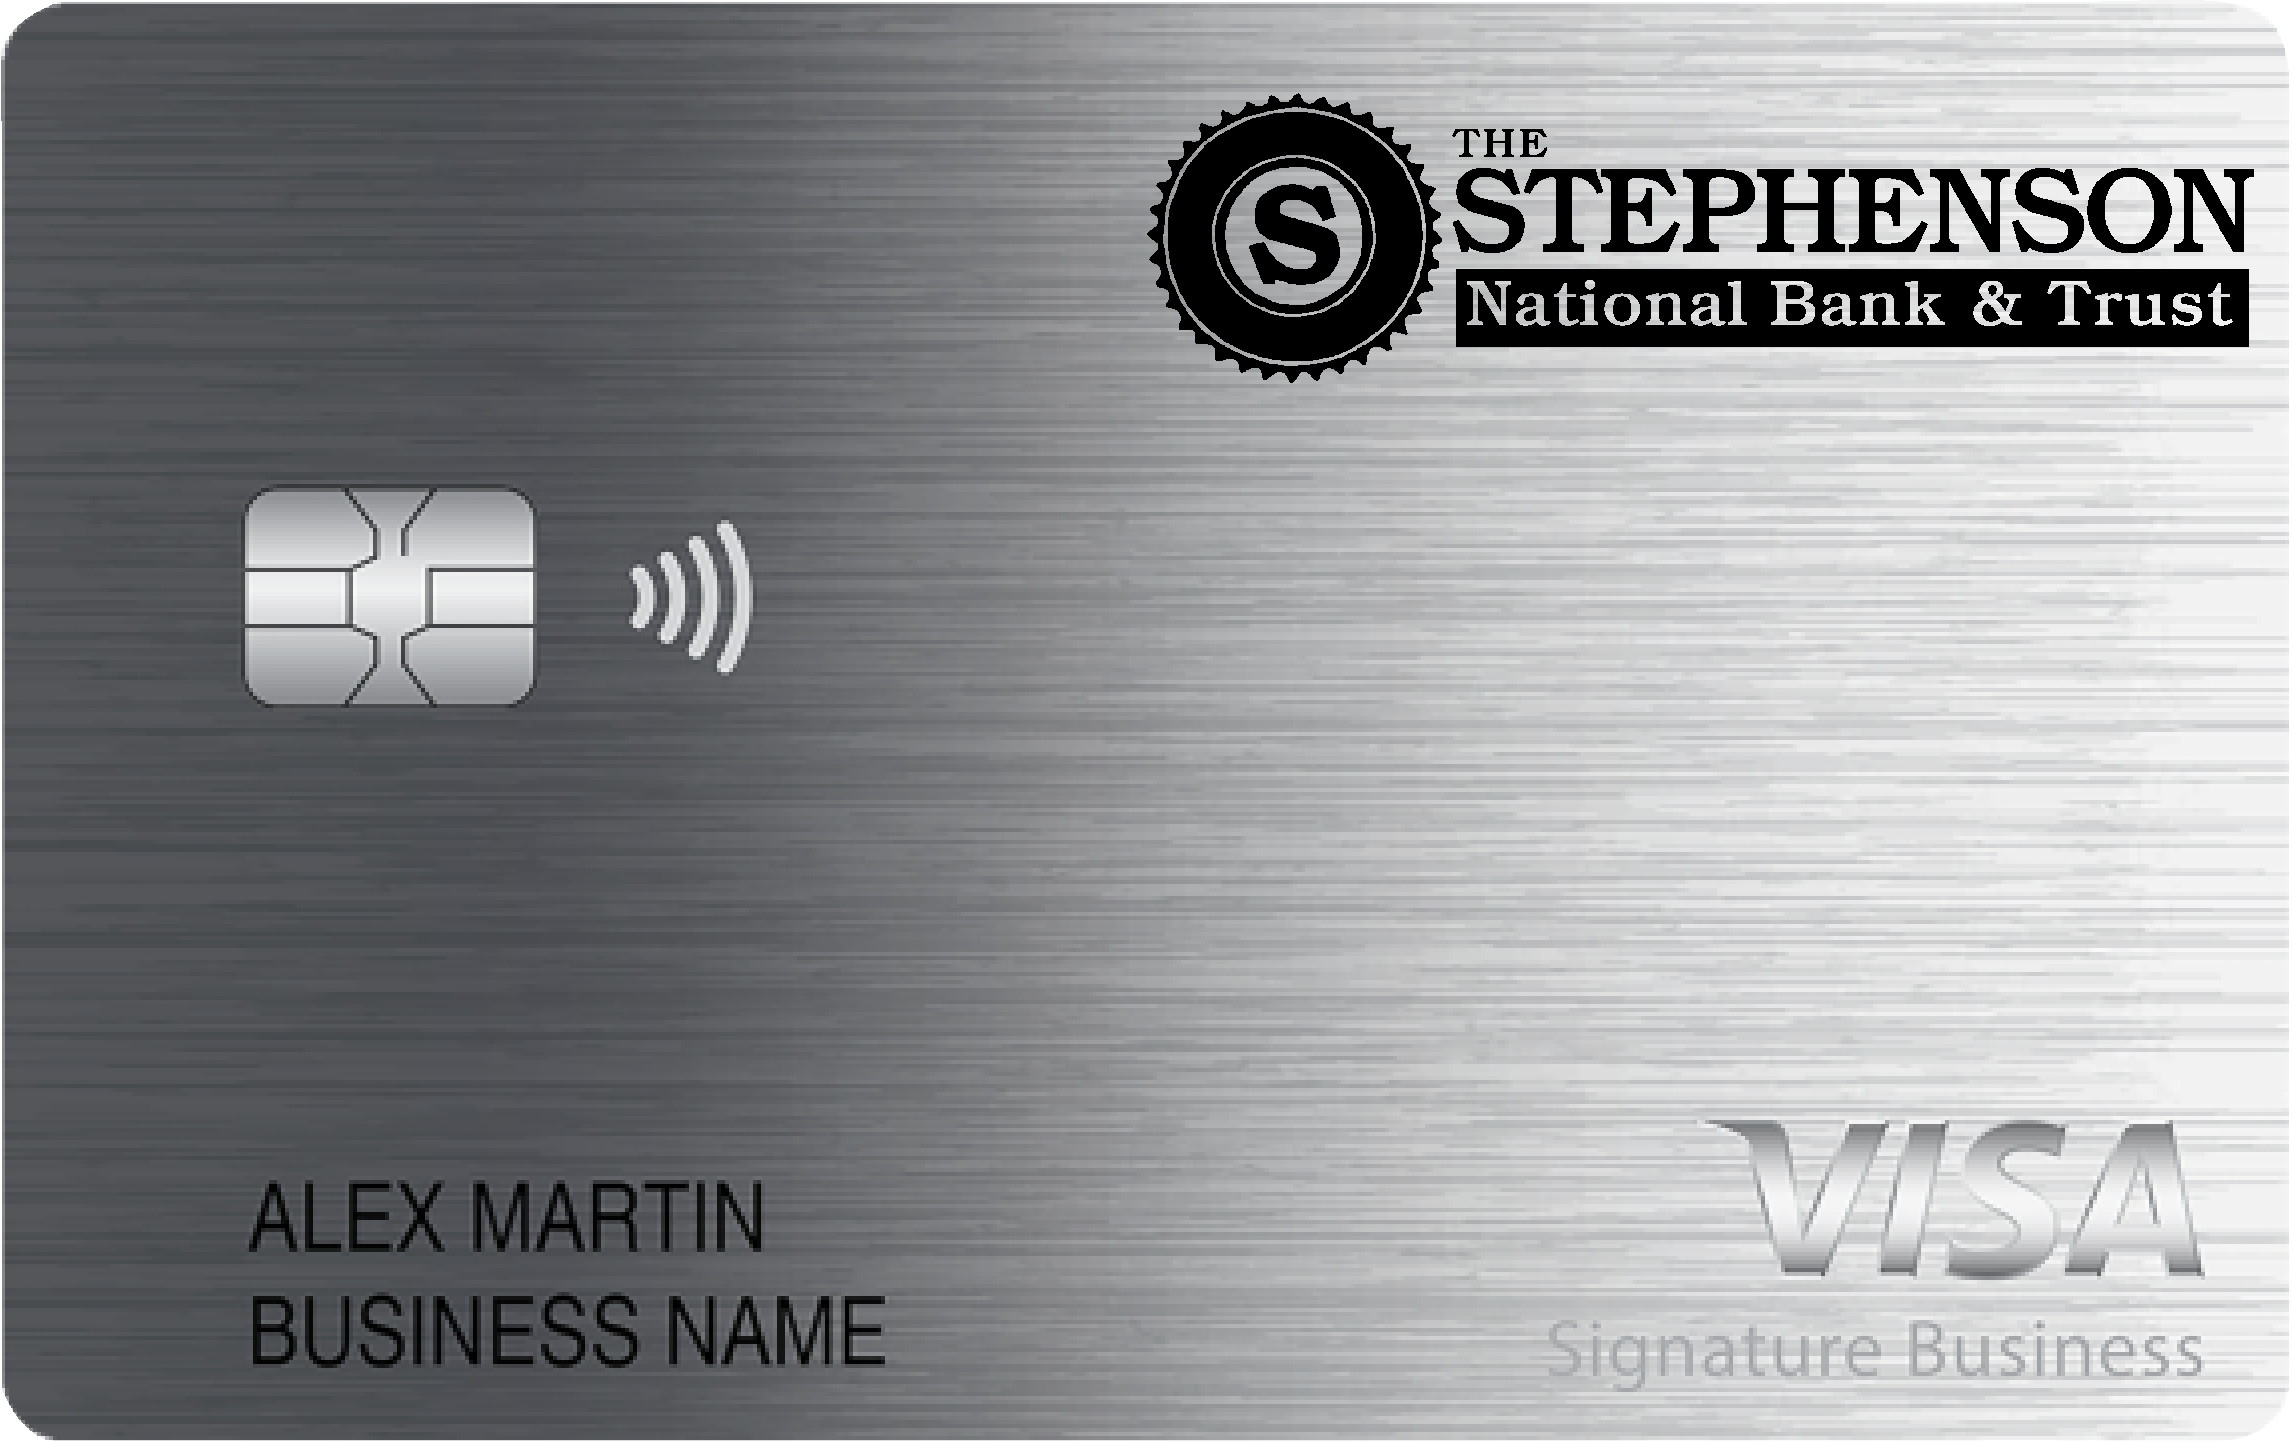 The Stephenson National Bank and Trust Business Cash Preferred Card